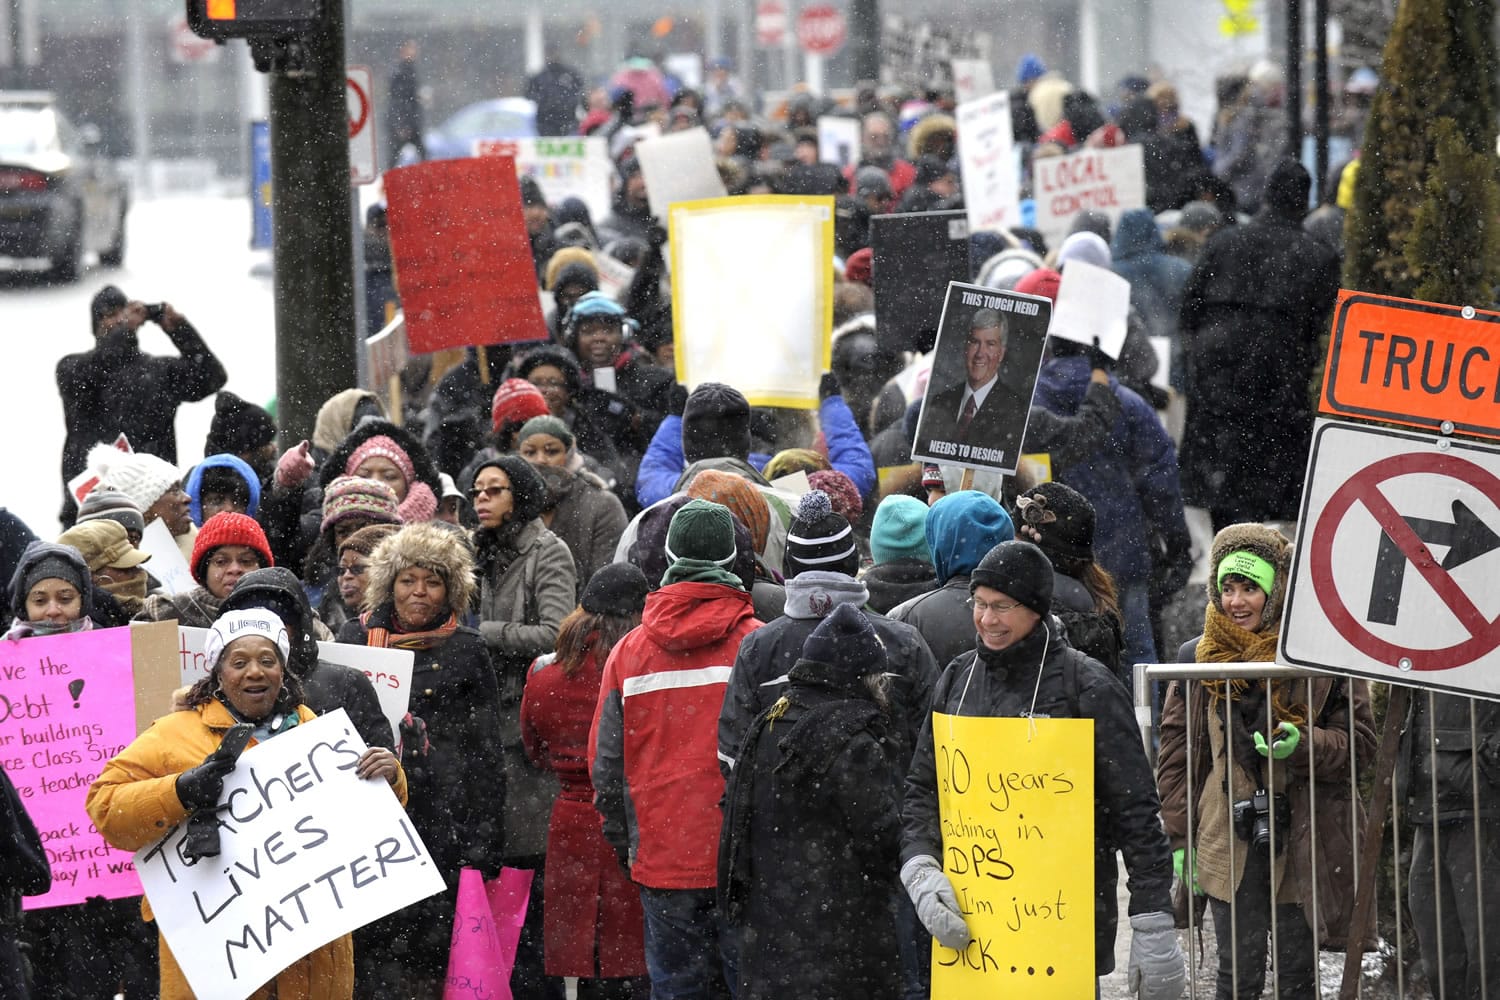 Teacher Denice McGee, bottom left, holds a sign as she and other protesters wait to cross the street Wednesday in Detroit. Most of Detroit&#039;s public schools closed for the day due to teacher absences, as disgruntled educators stepped up protest efforts.